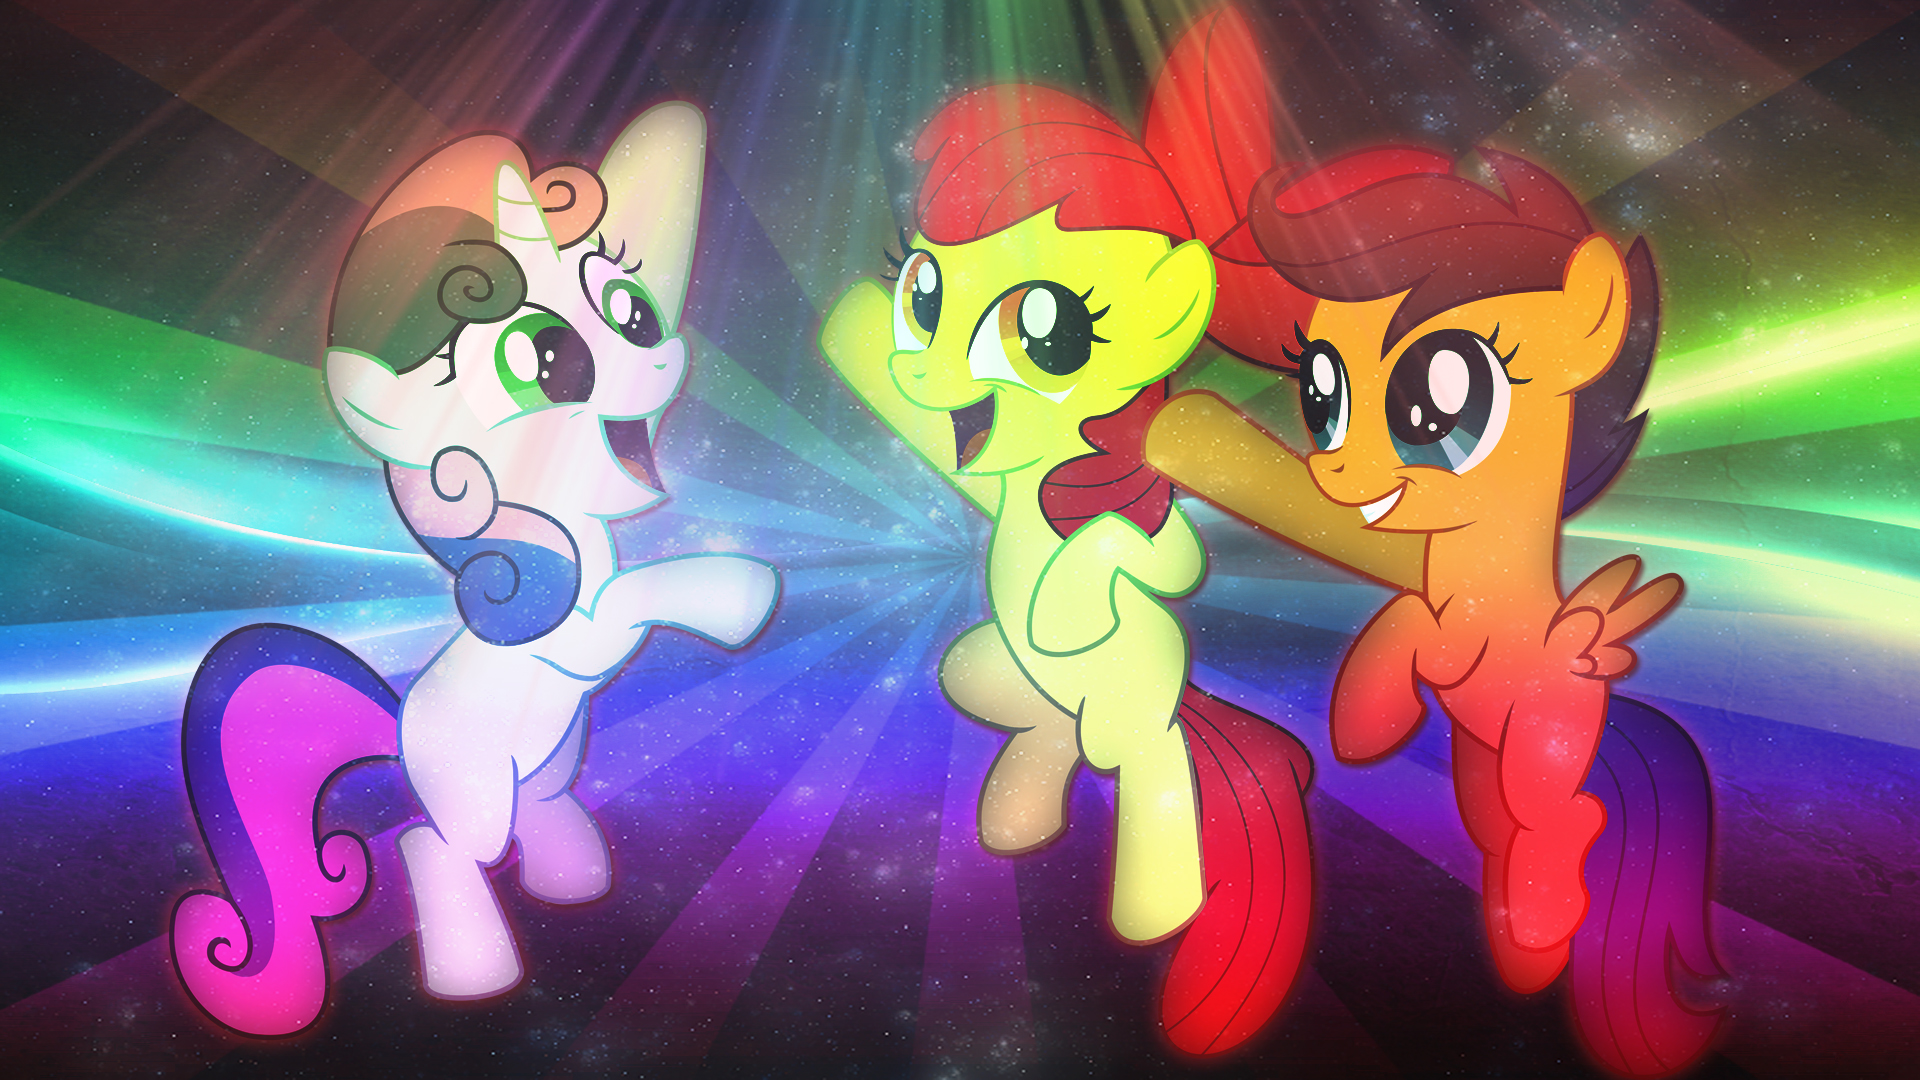 Cutie Mark Crusaders Wallpaper by RegolithX and TygerxL. My